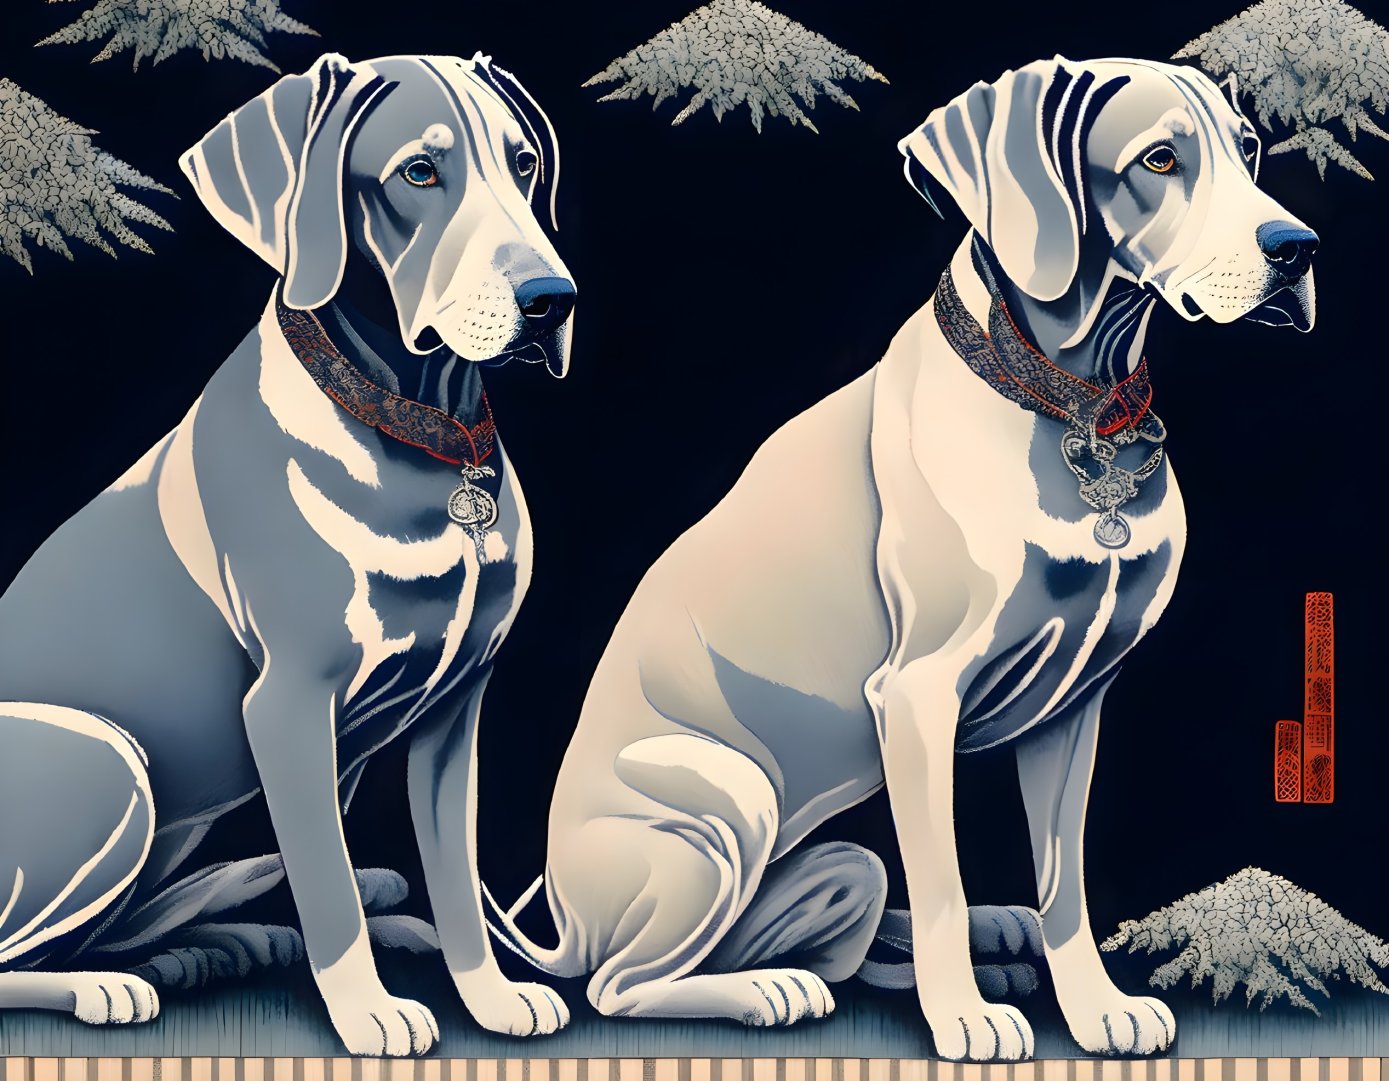 Stylized Great Danes with collars against dark background & plants